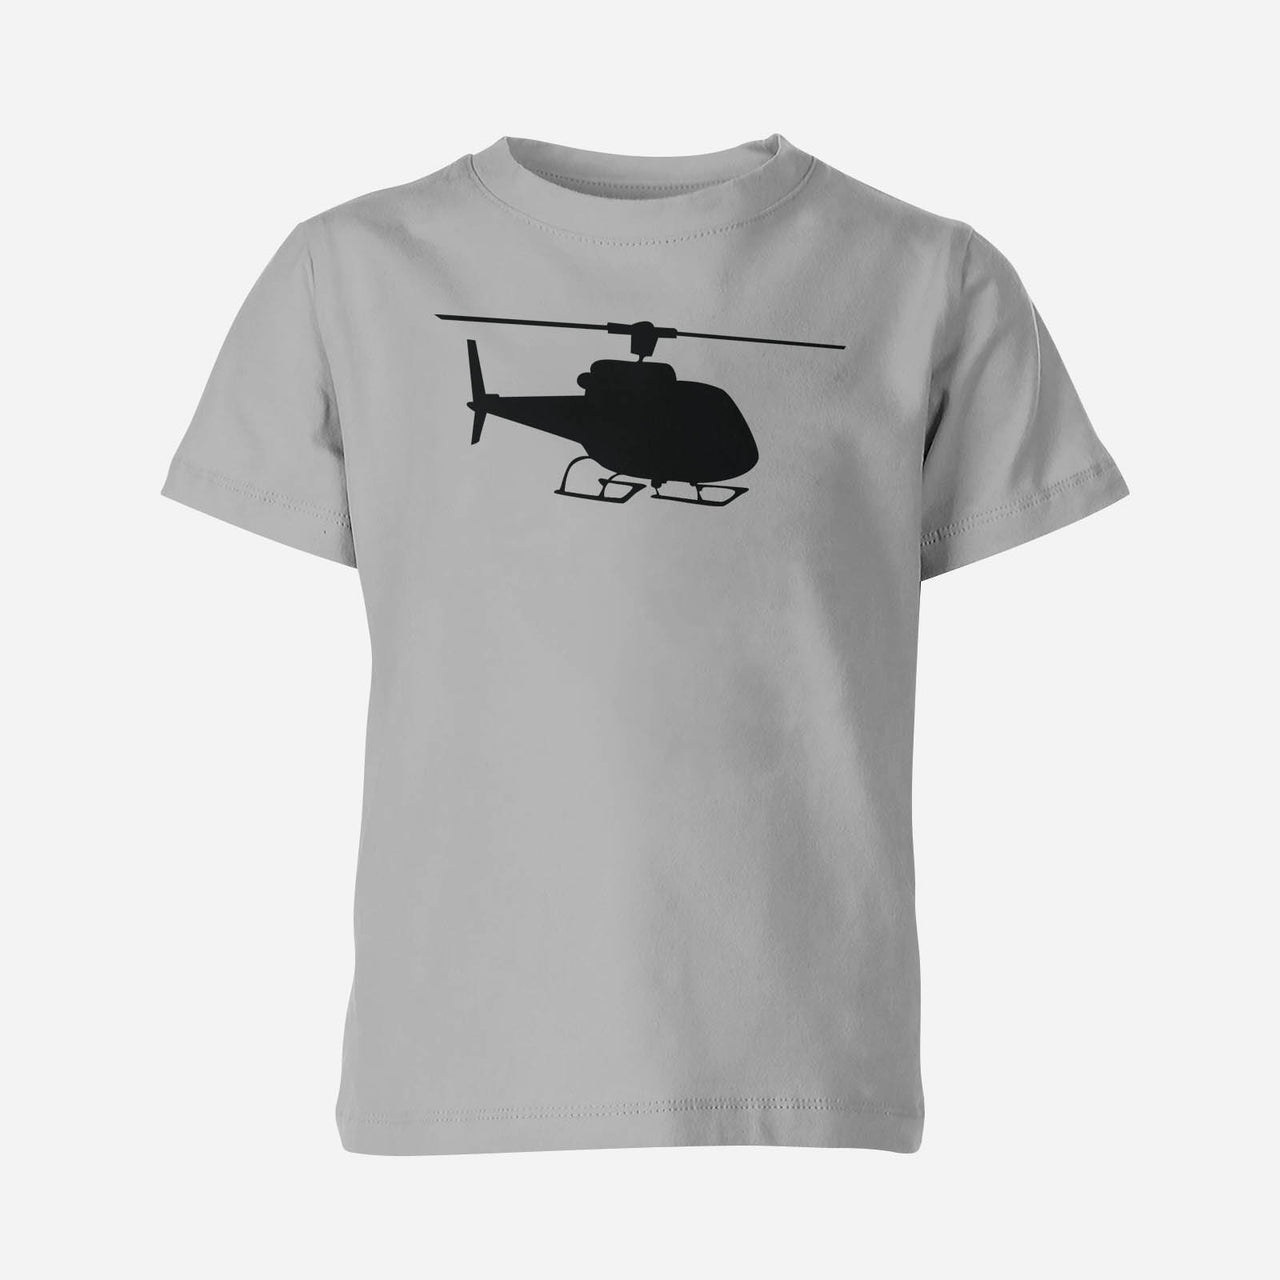 Helicopter Silhouette Designed Children T-Shirts